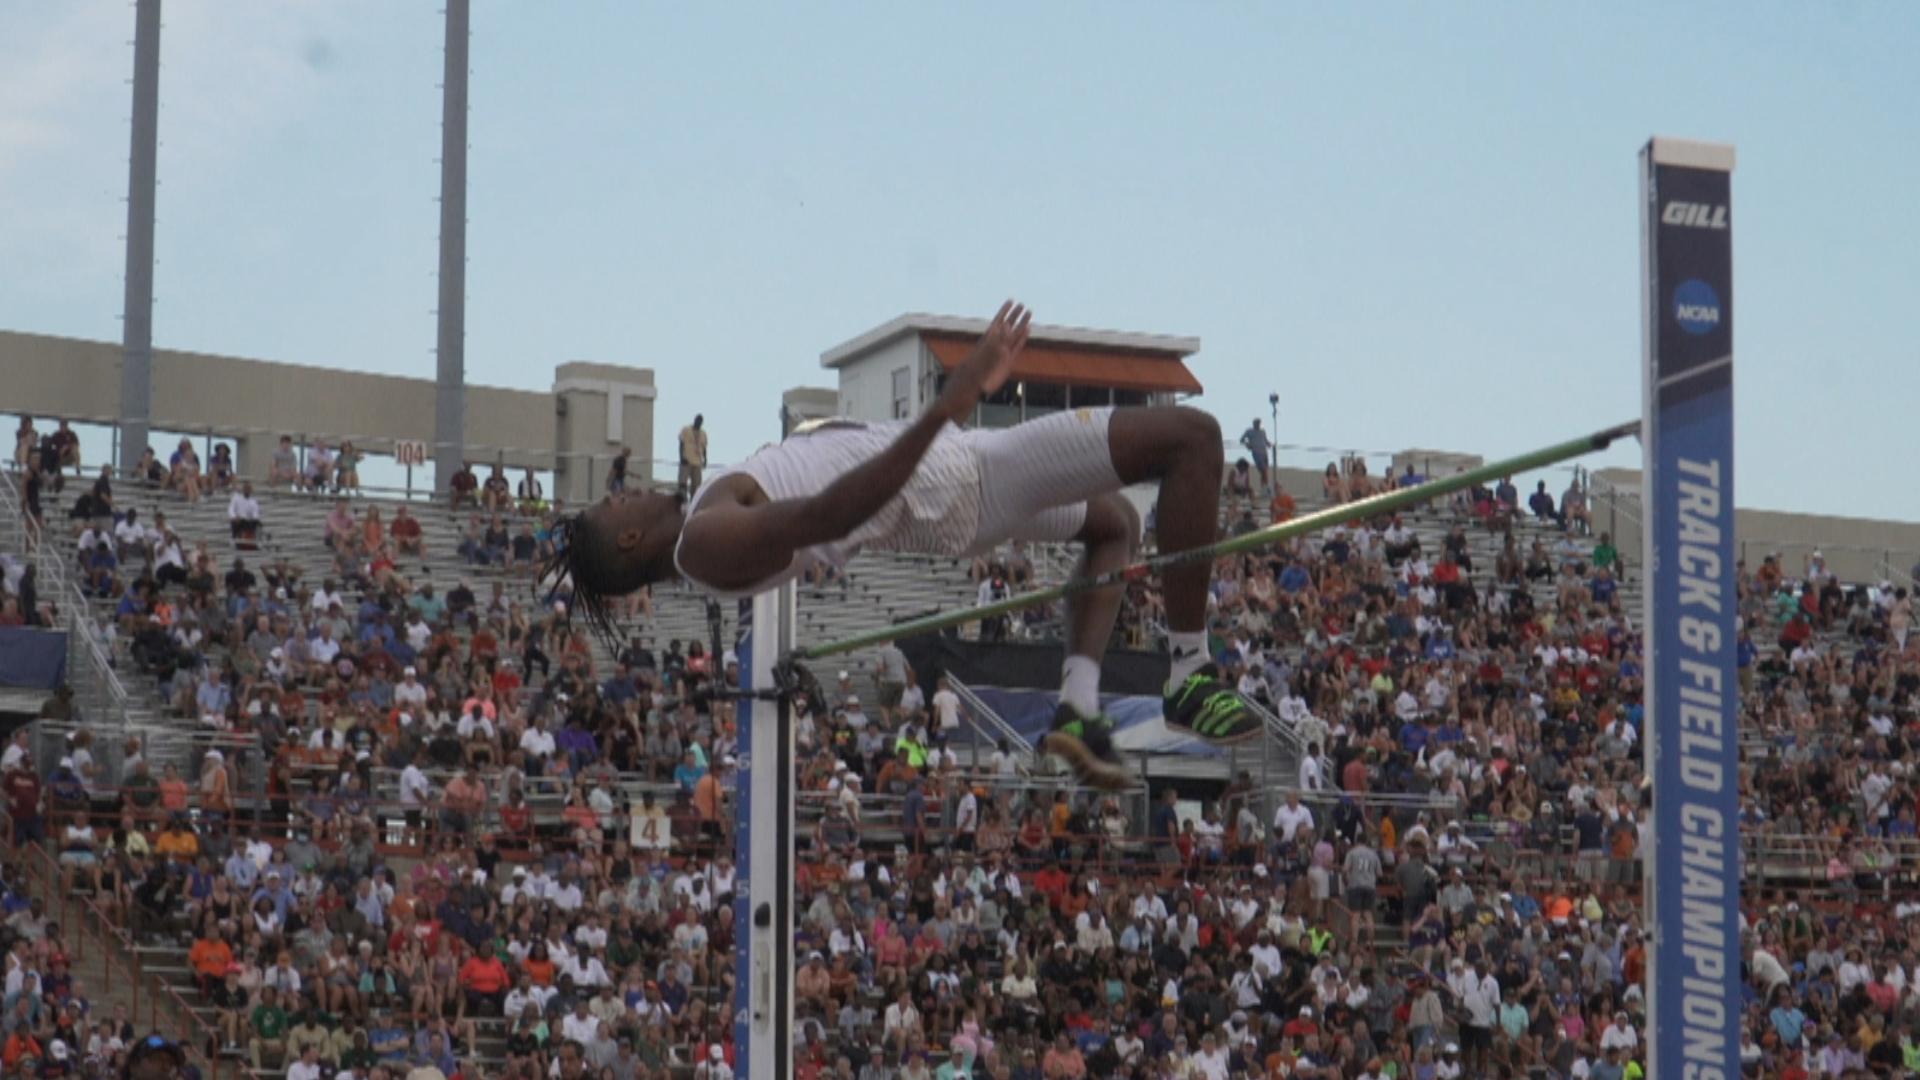 Caleb Snowden will hope to win gold for the Golden Lions this week in the high jump at the NCAA championships